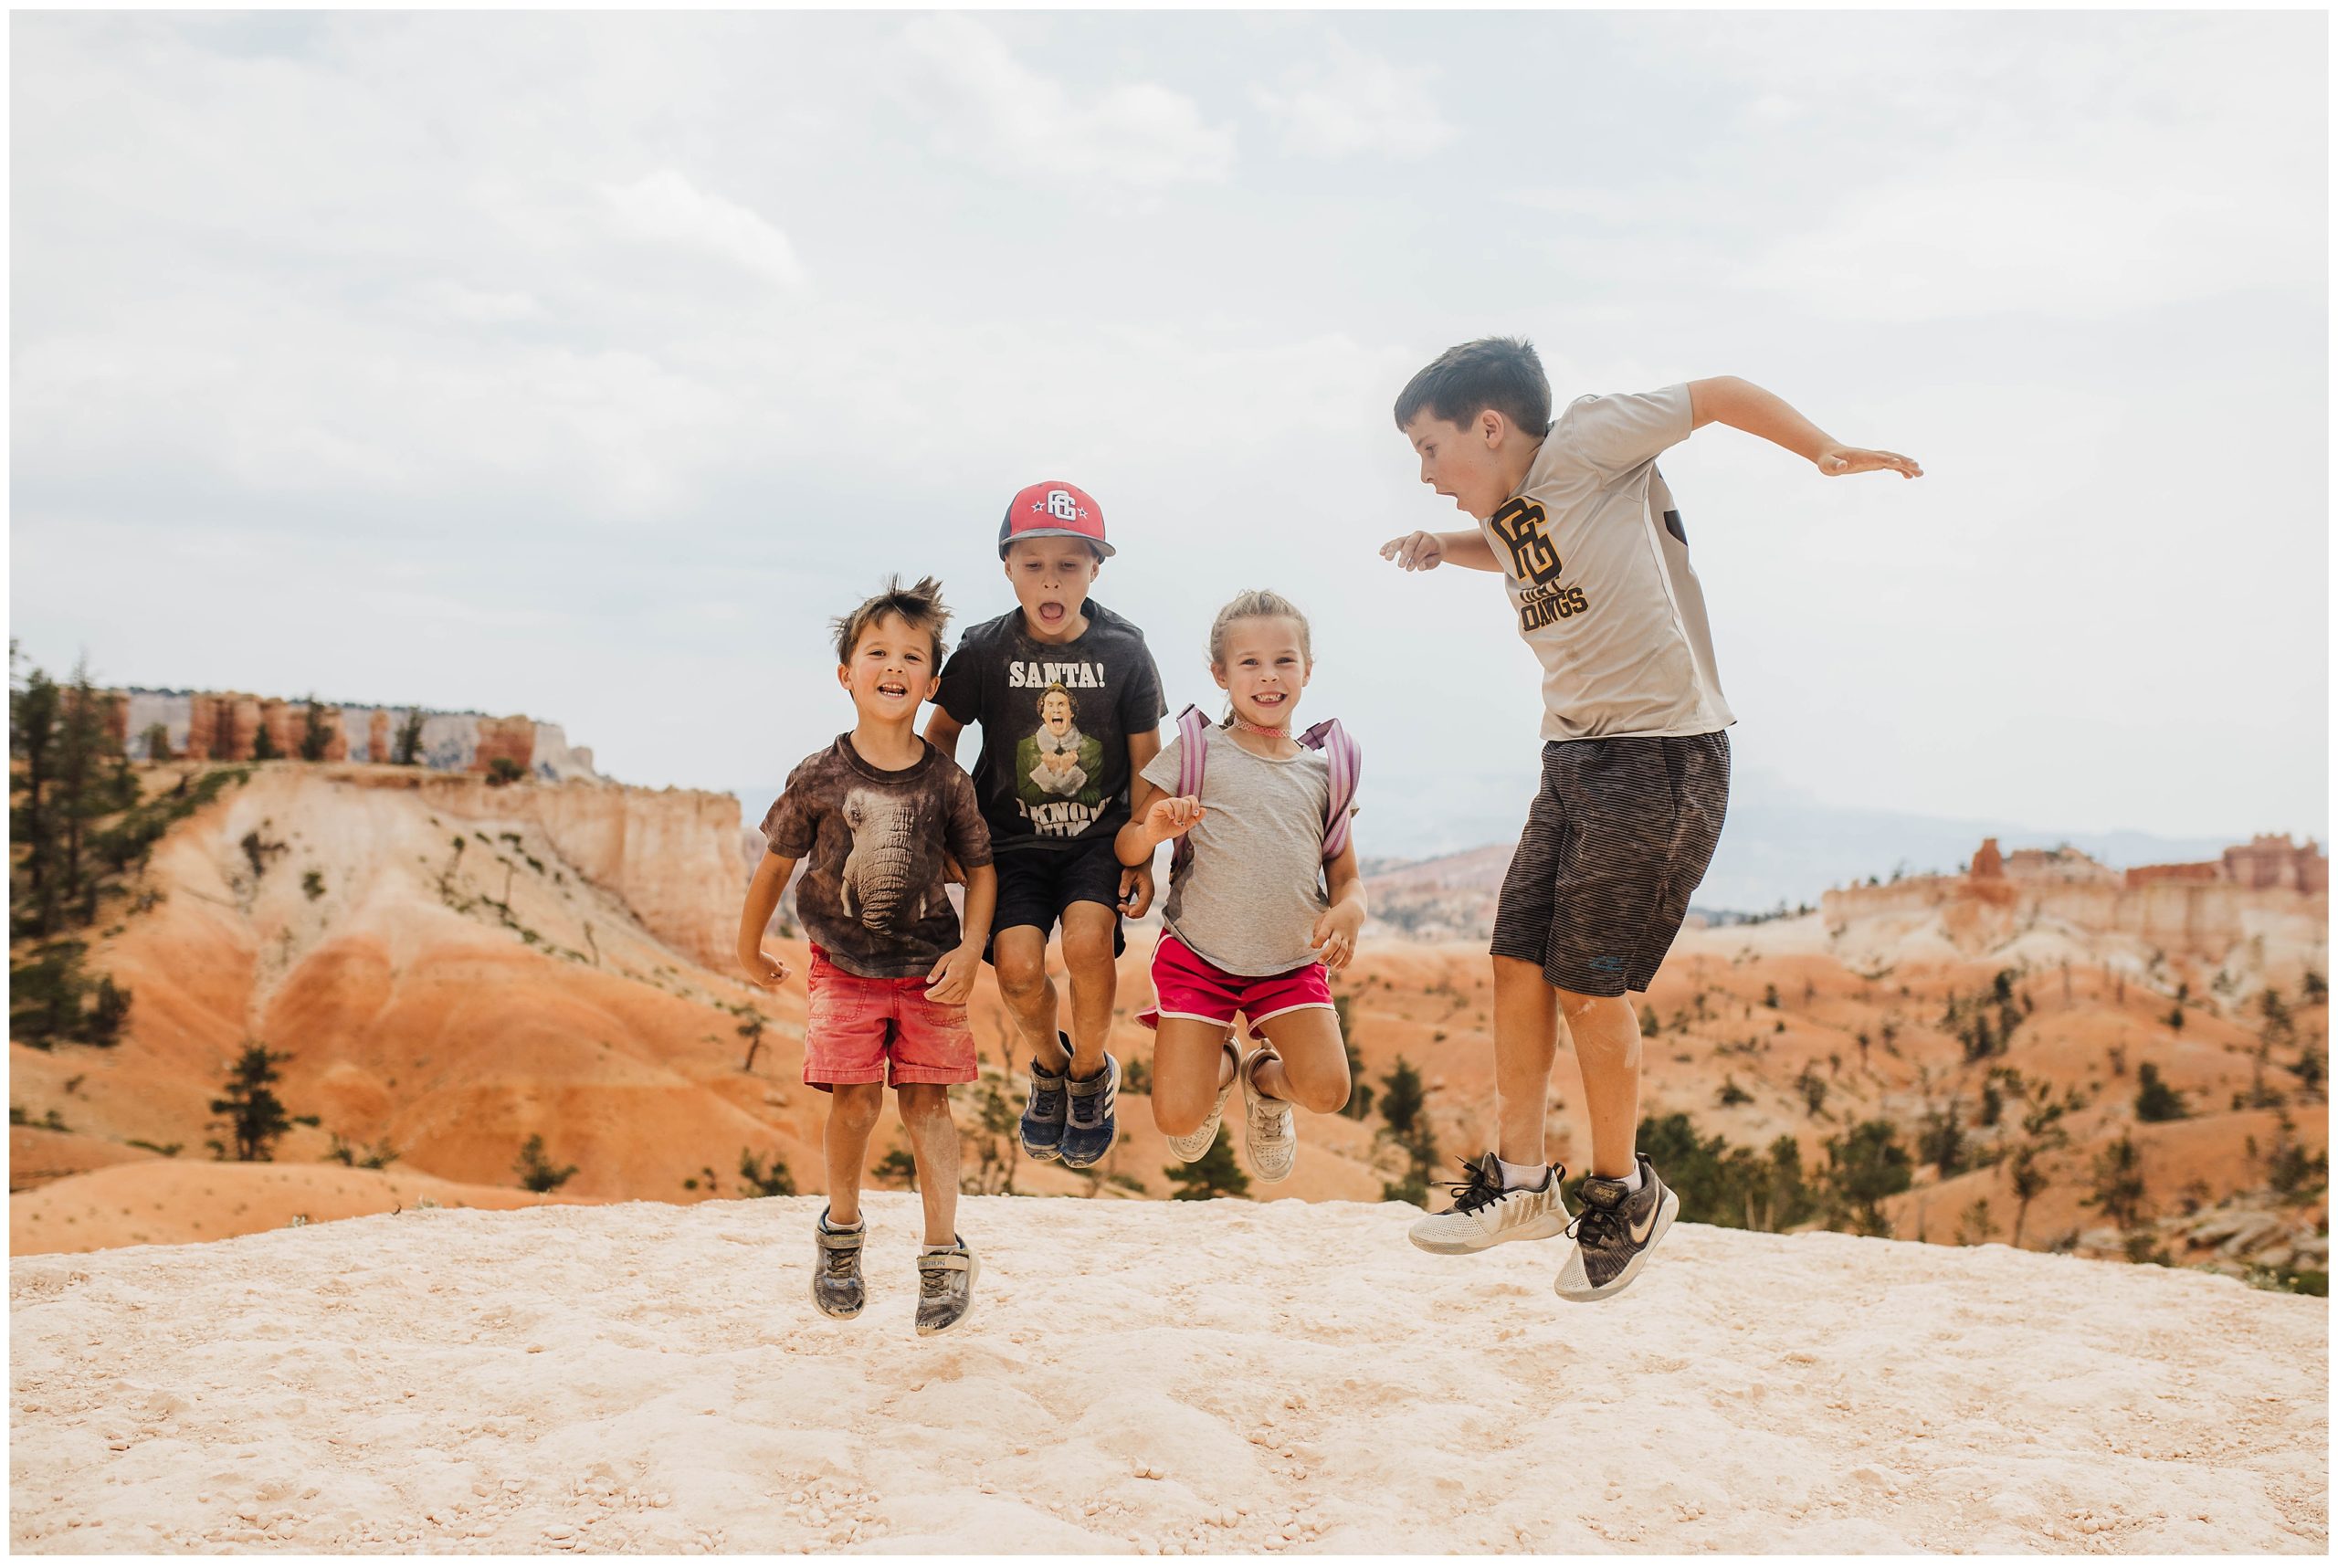 Kids jumping at Bryce Canyon while on a road trip